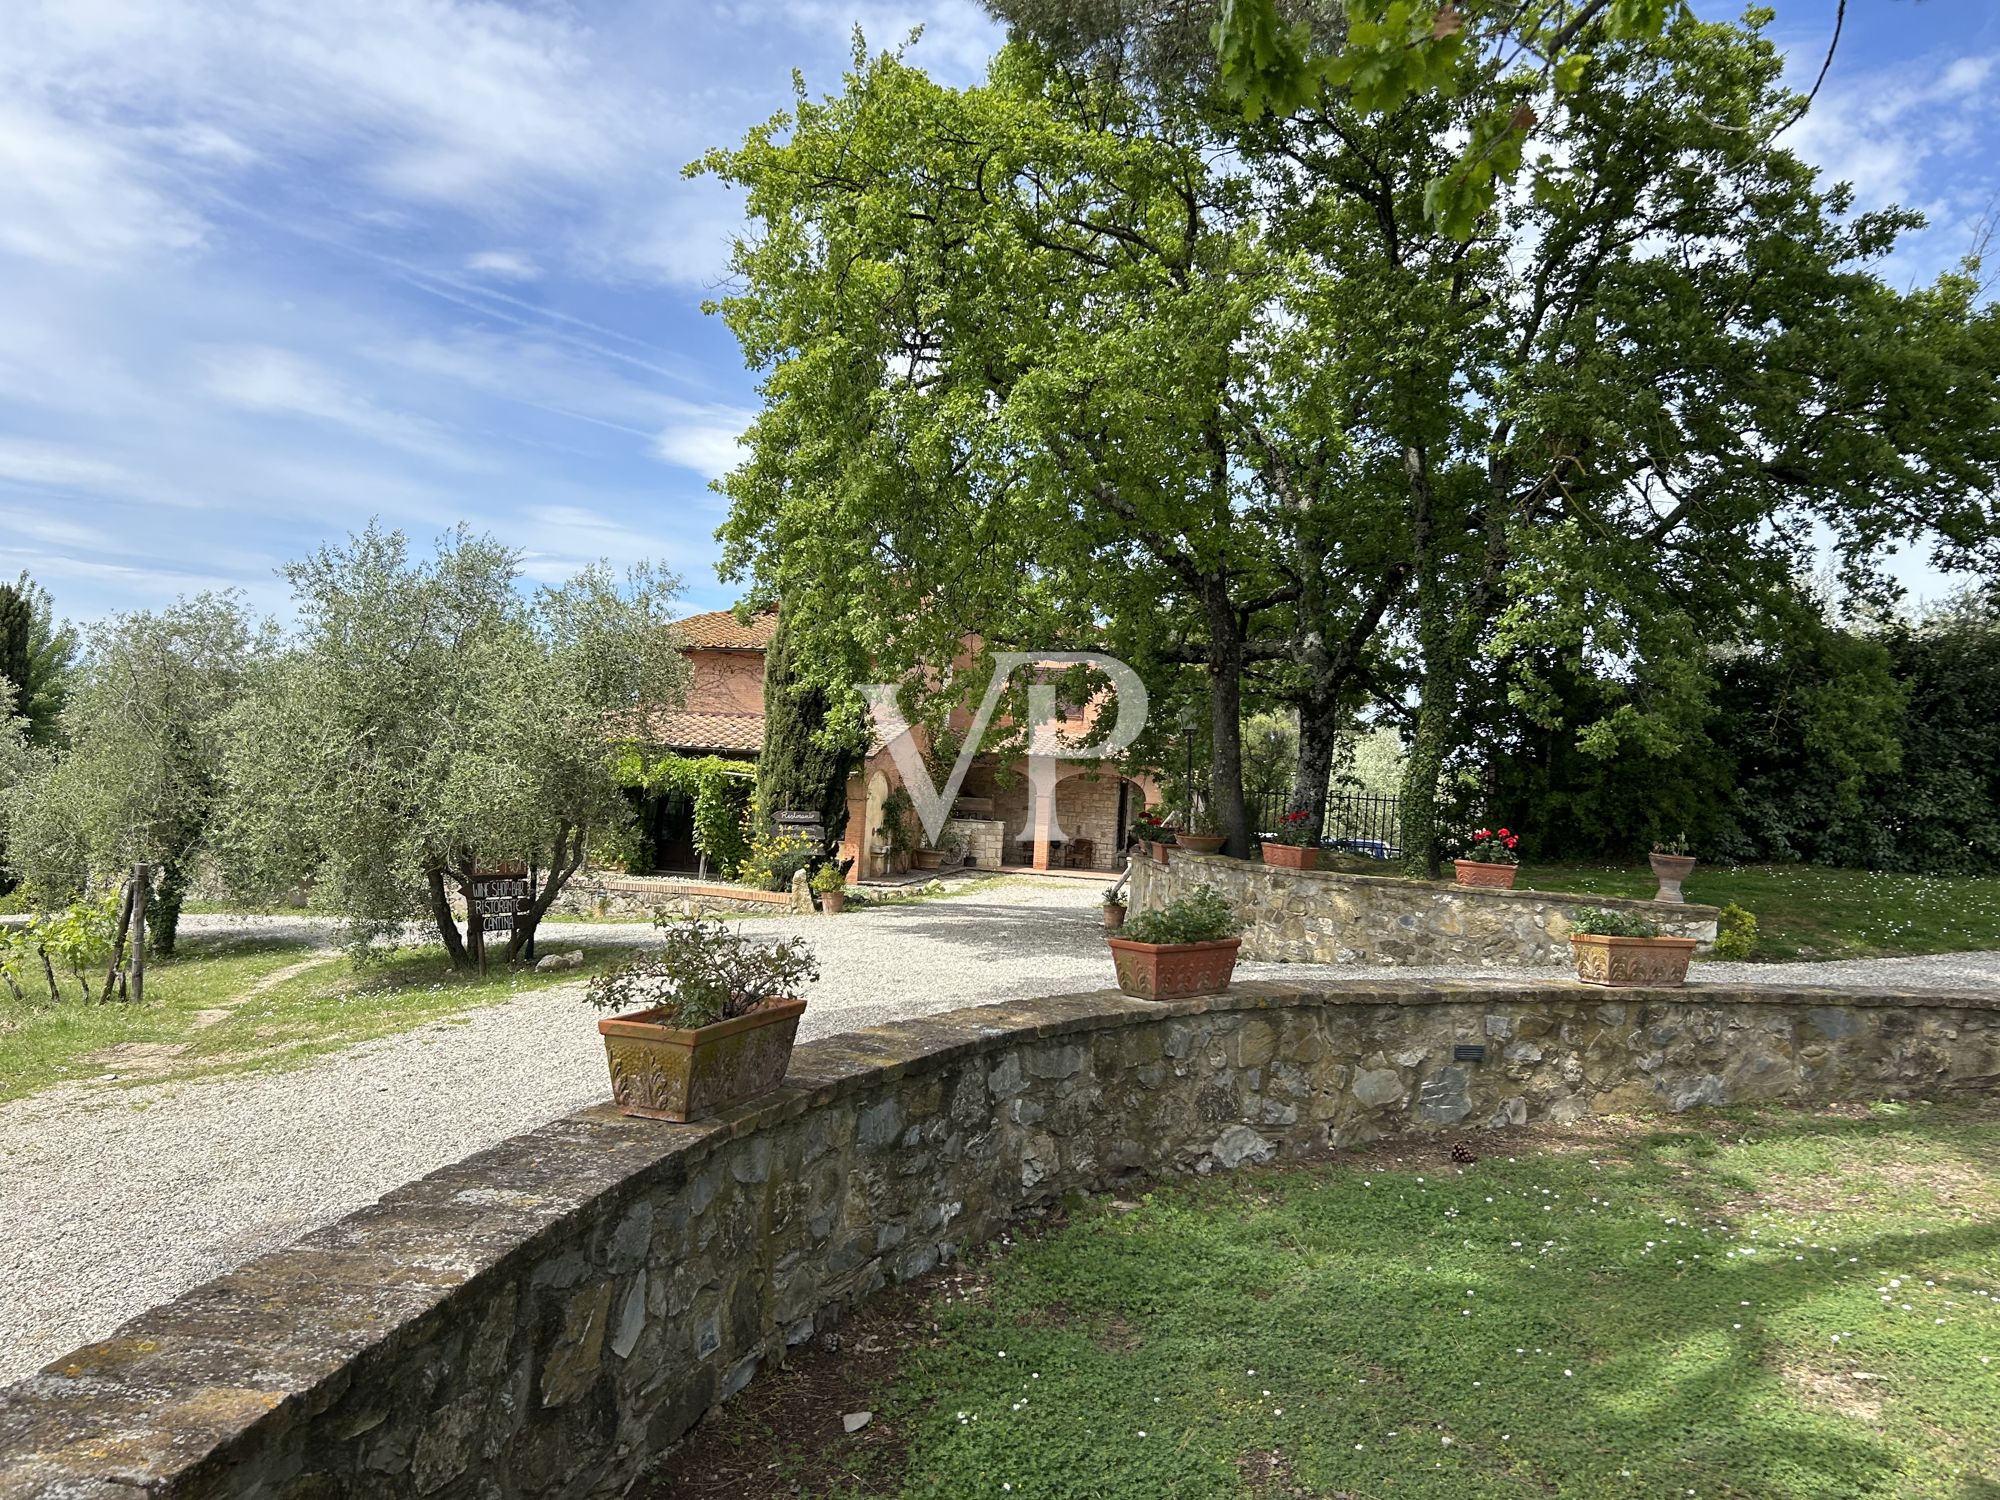 Magnificent Property Immersed In 220,000 Hectares In Chianti Classico Area